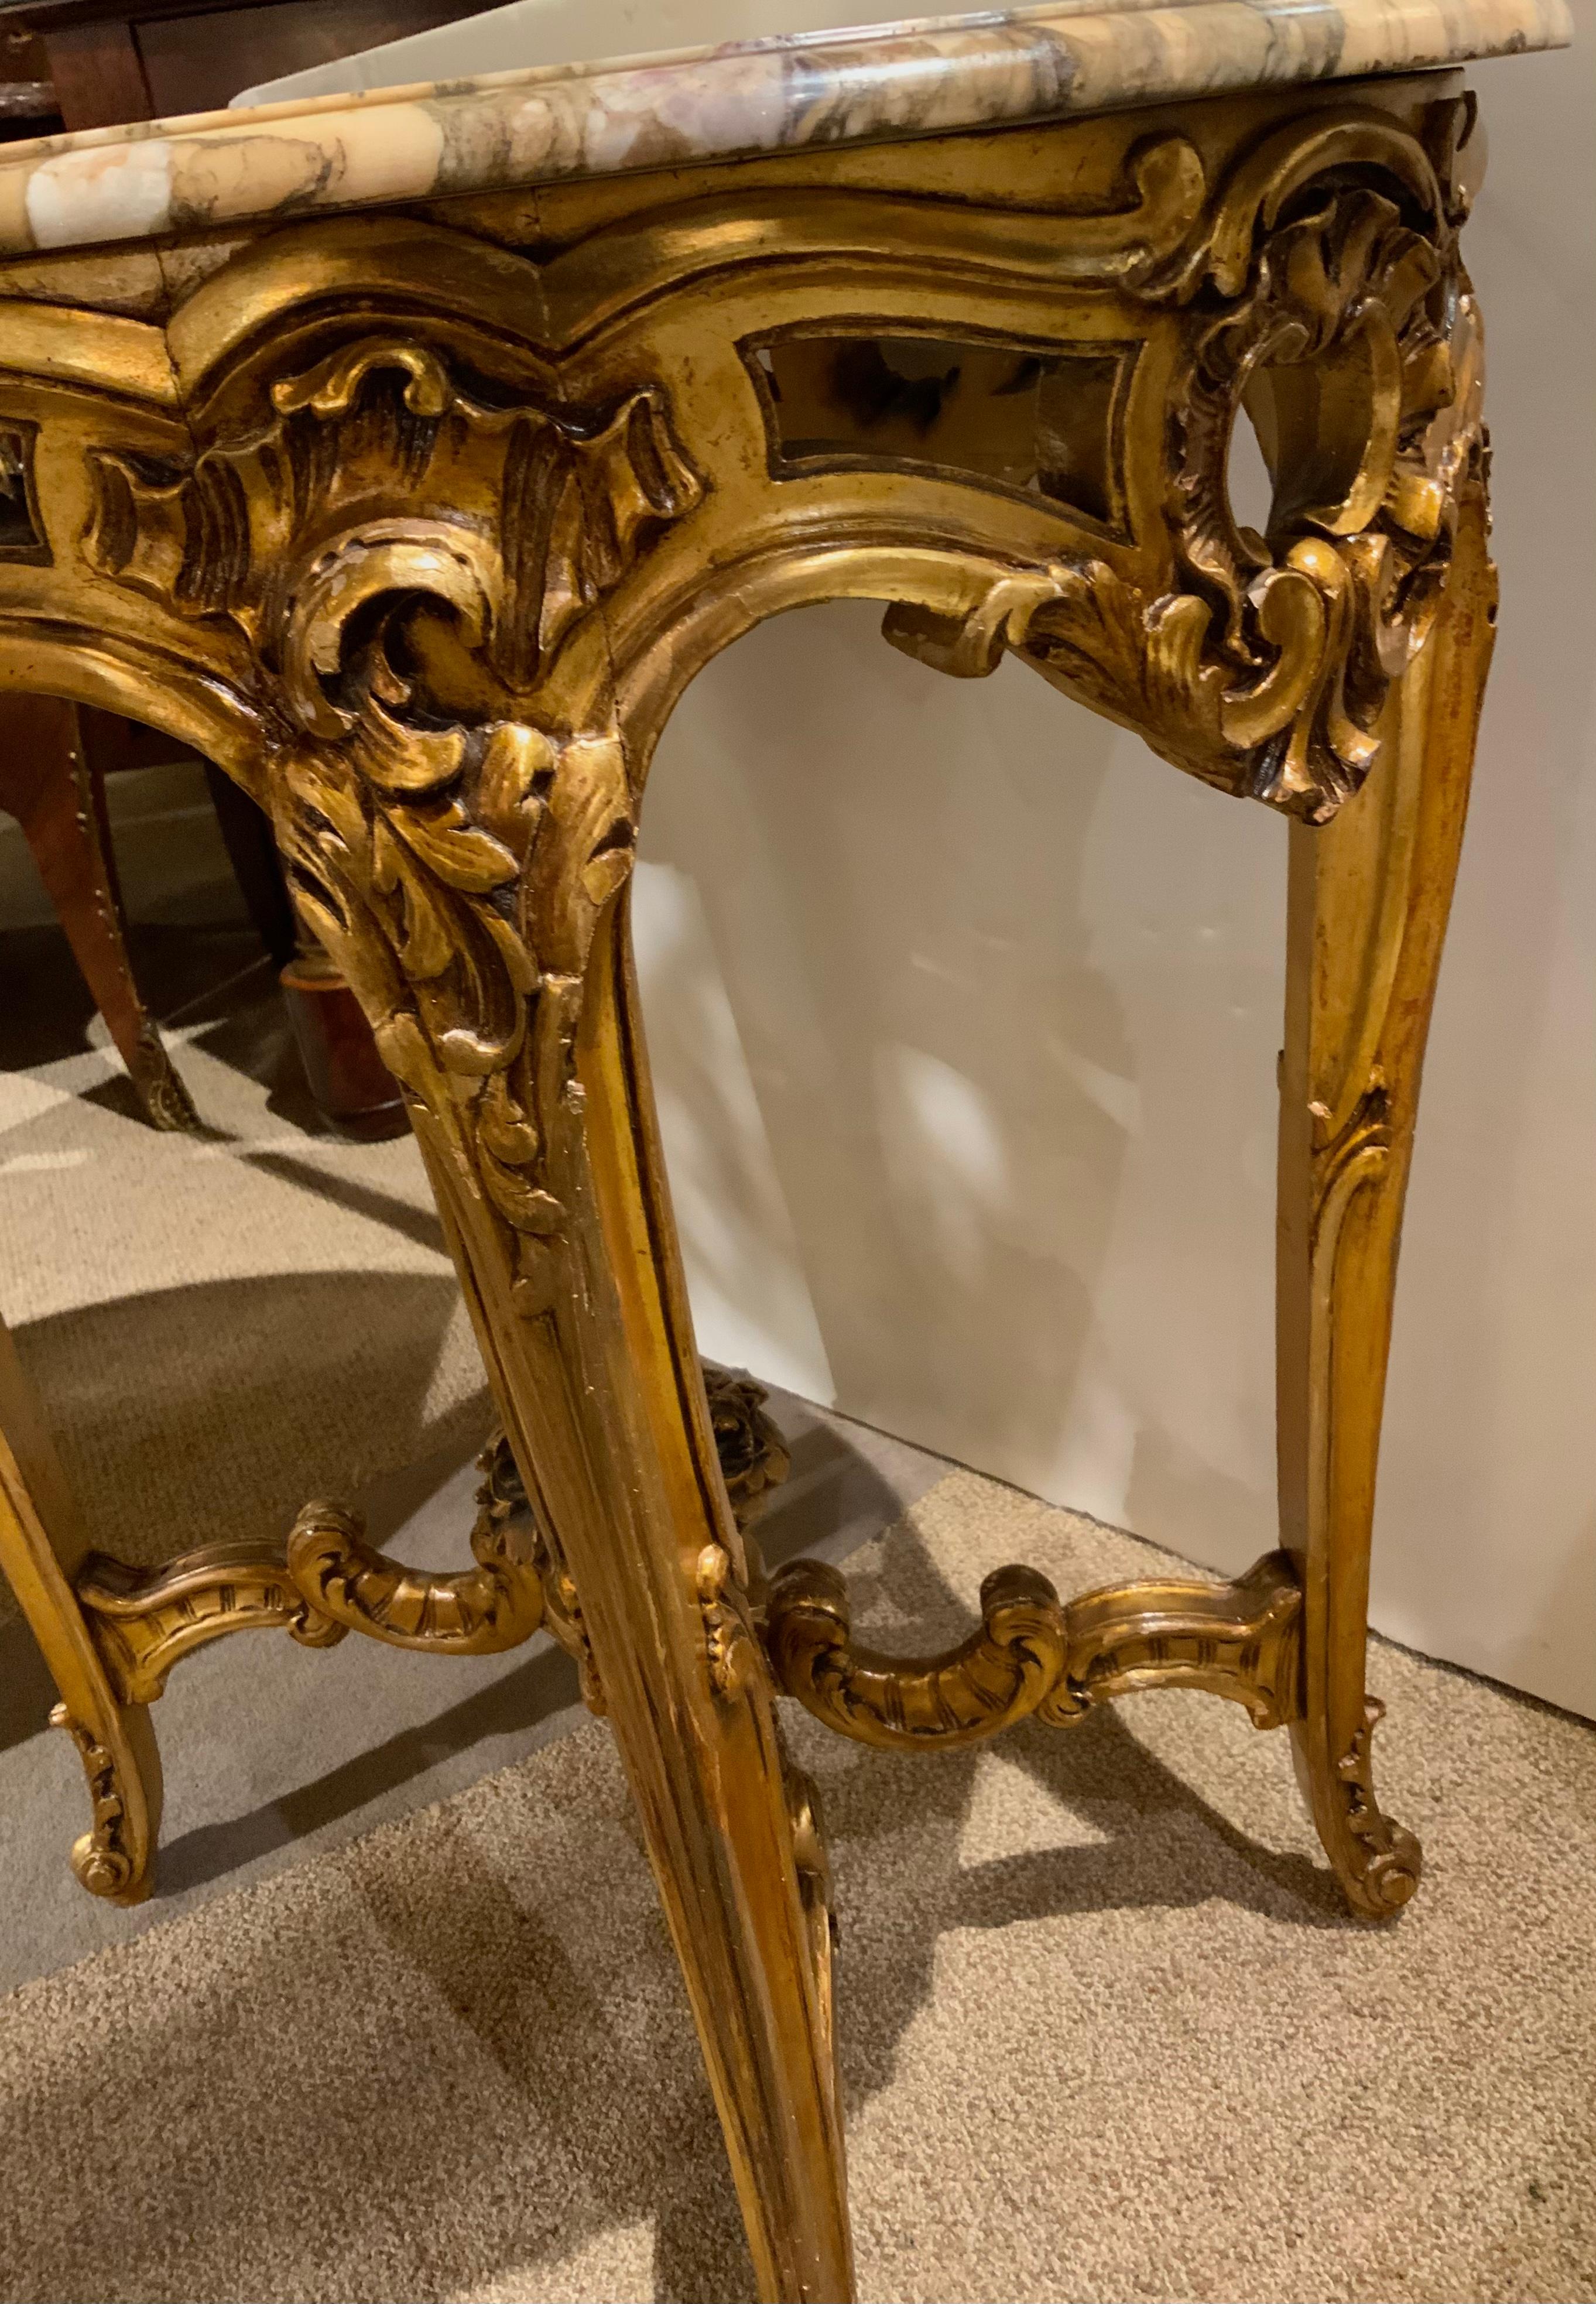 Graceful oval shape is a special attribute for this piece.
The carving is well done and it has curved shaped cabriole 
Legs in the Louis XV style. the marble is Breche de Violet
With a mix of cream, gold and violet hues. The apron of
This table